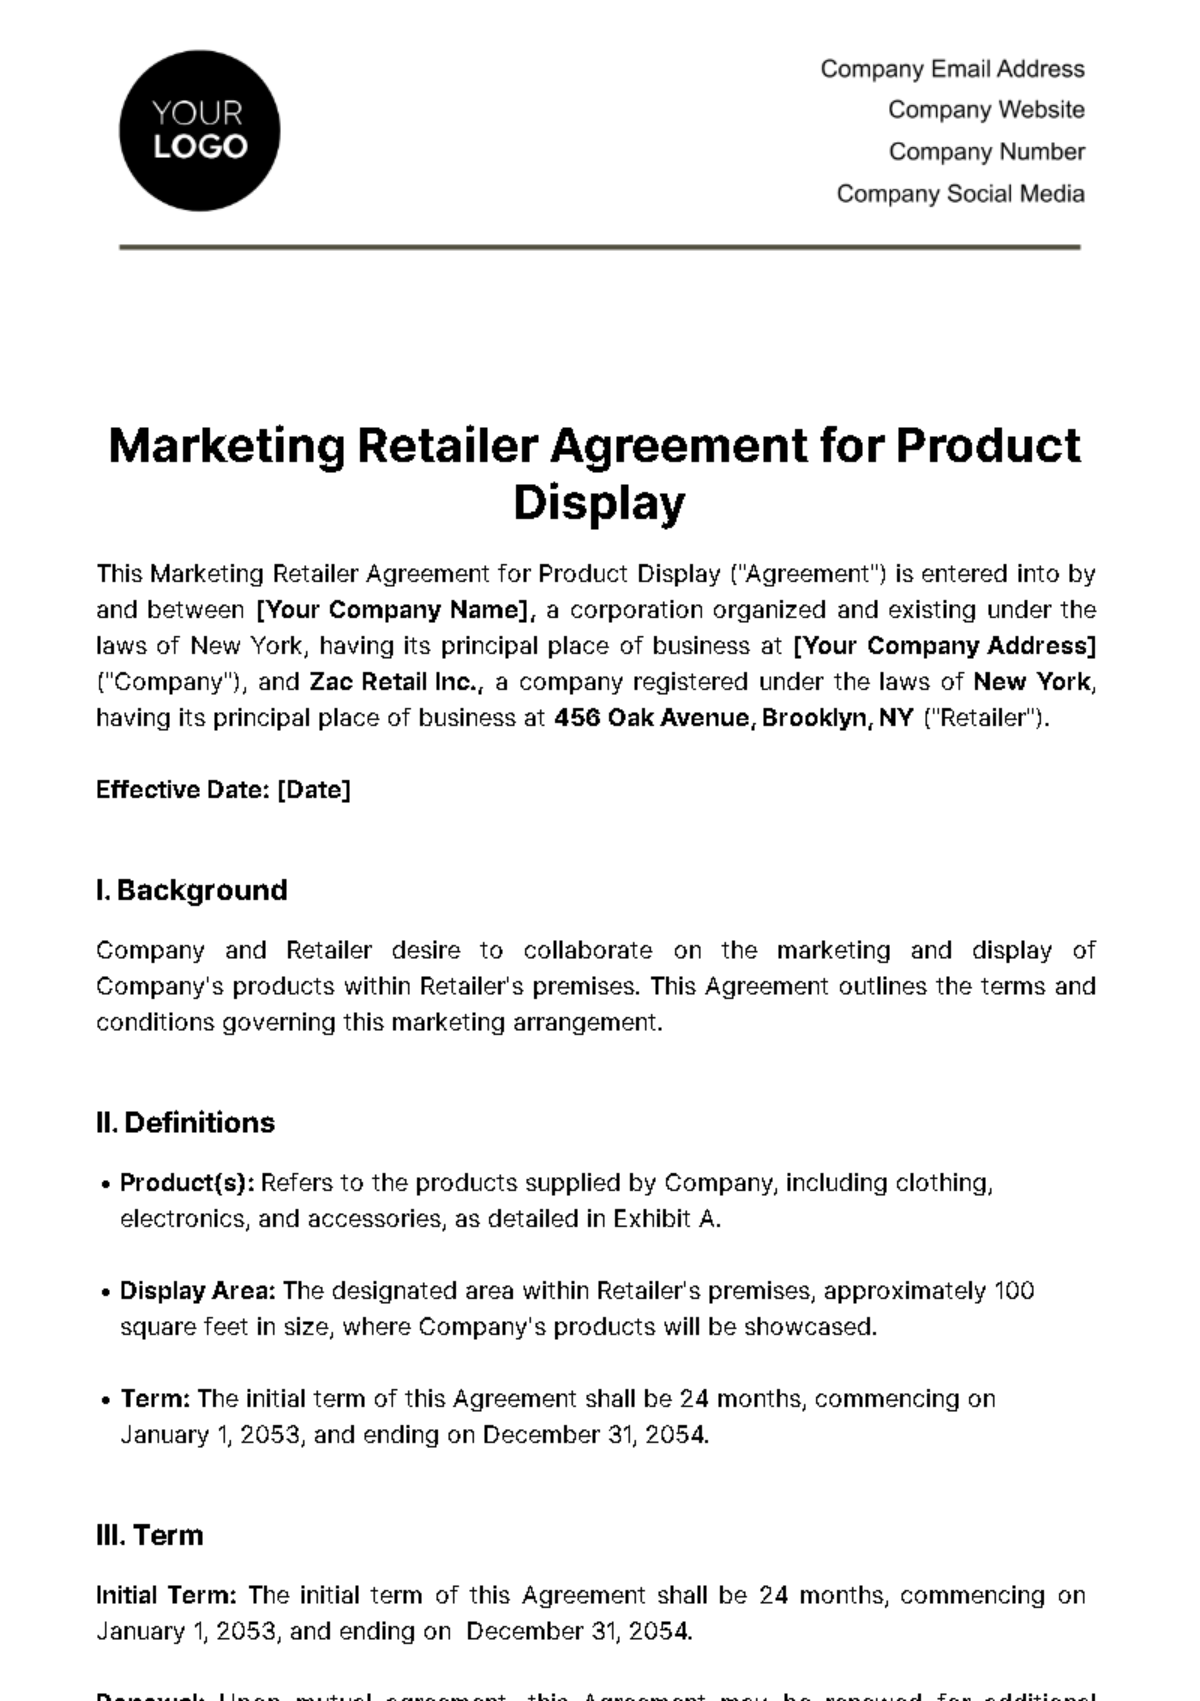 Free Marketing Retailer Agreement for Product Display Template